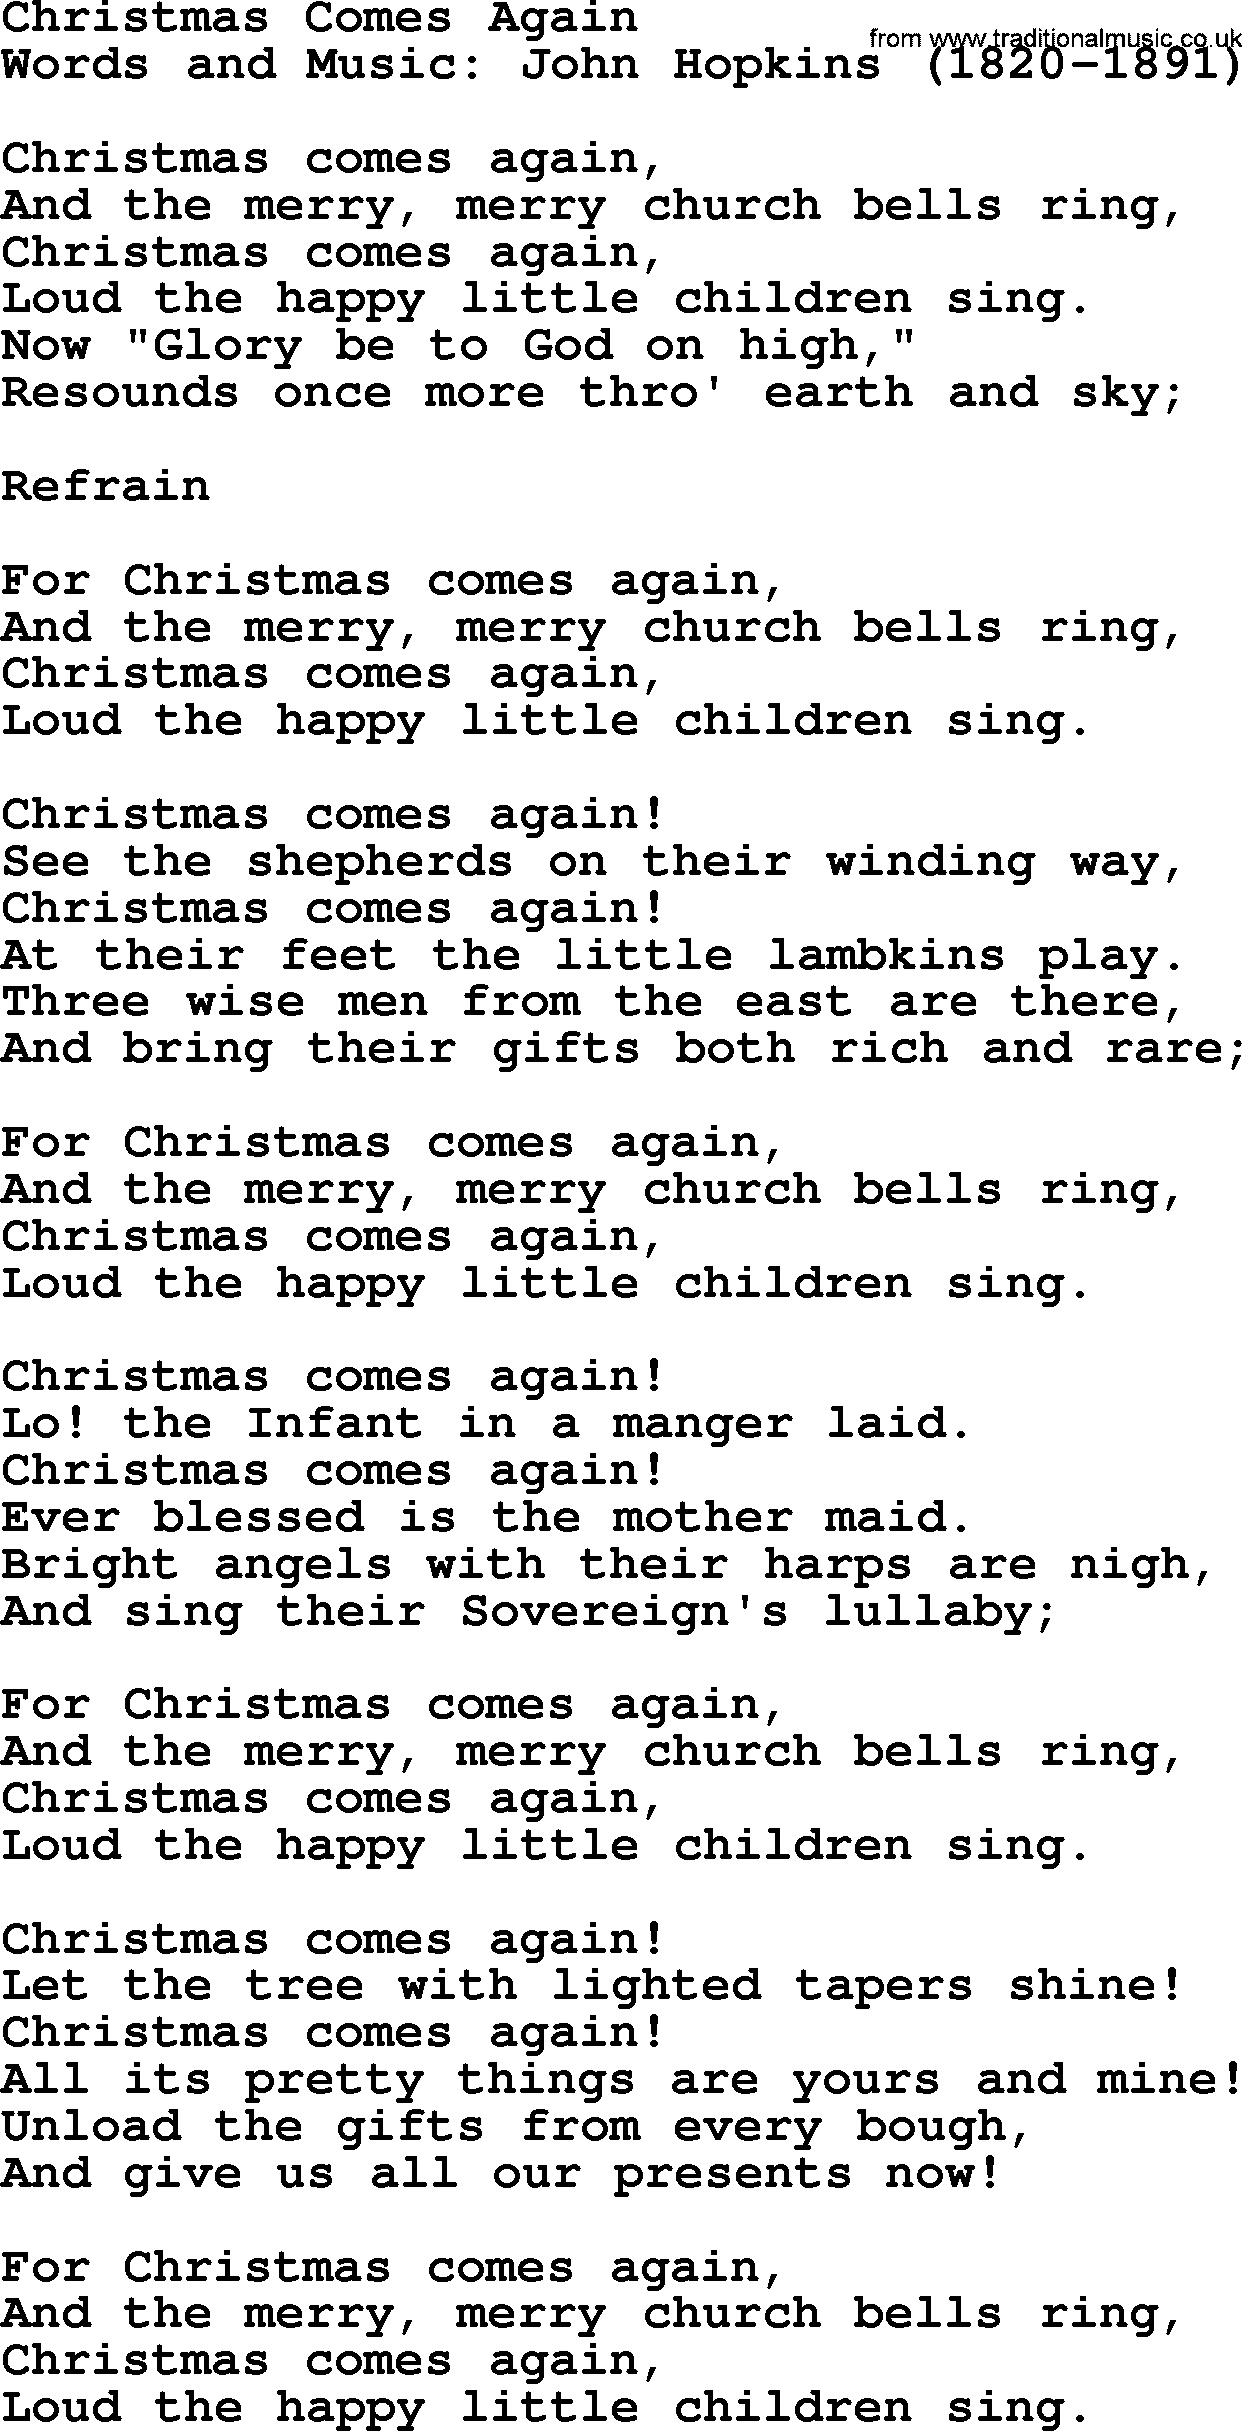 280 Christmas Hymns and songs with PowerPoints and PDF, title: Christmas Comes Again, lyrics, PPT and PDF